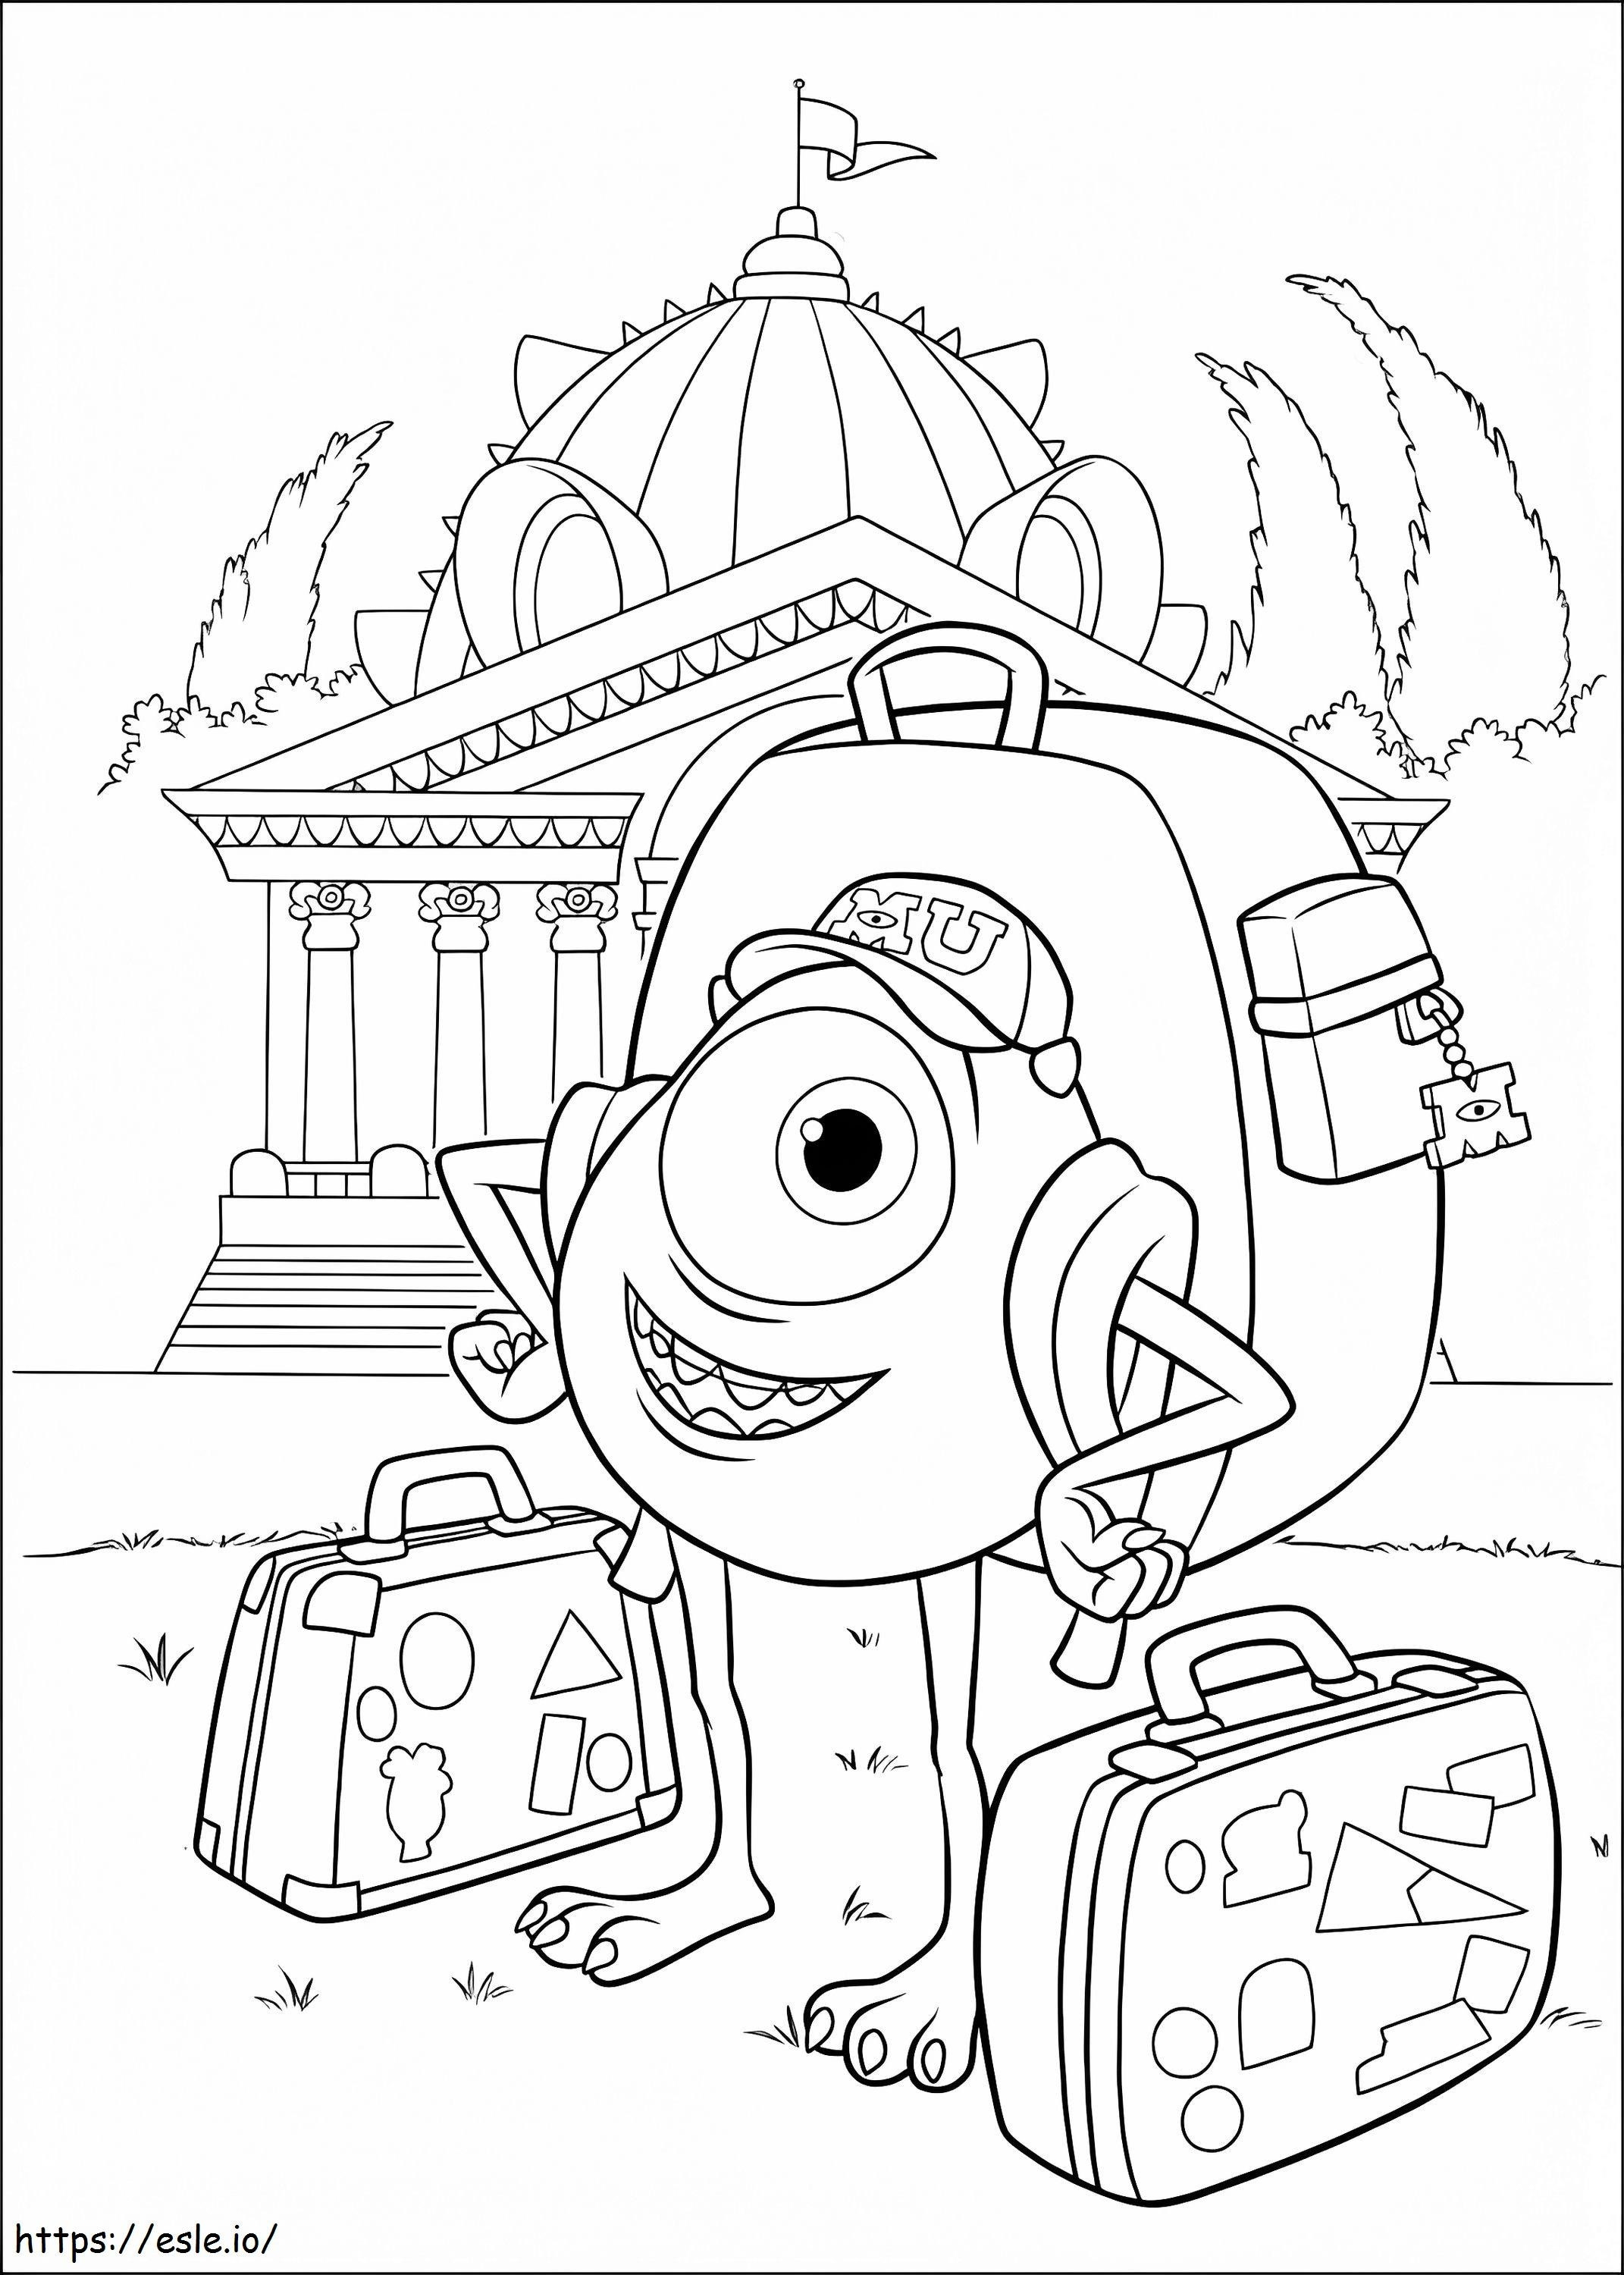 Disney Monsters University coloring page